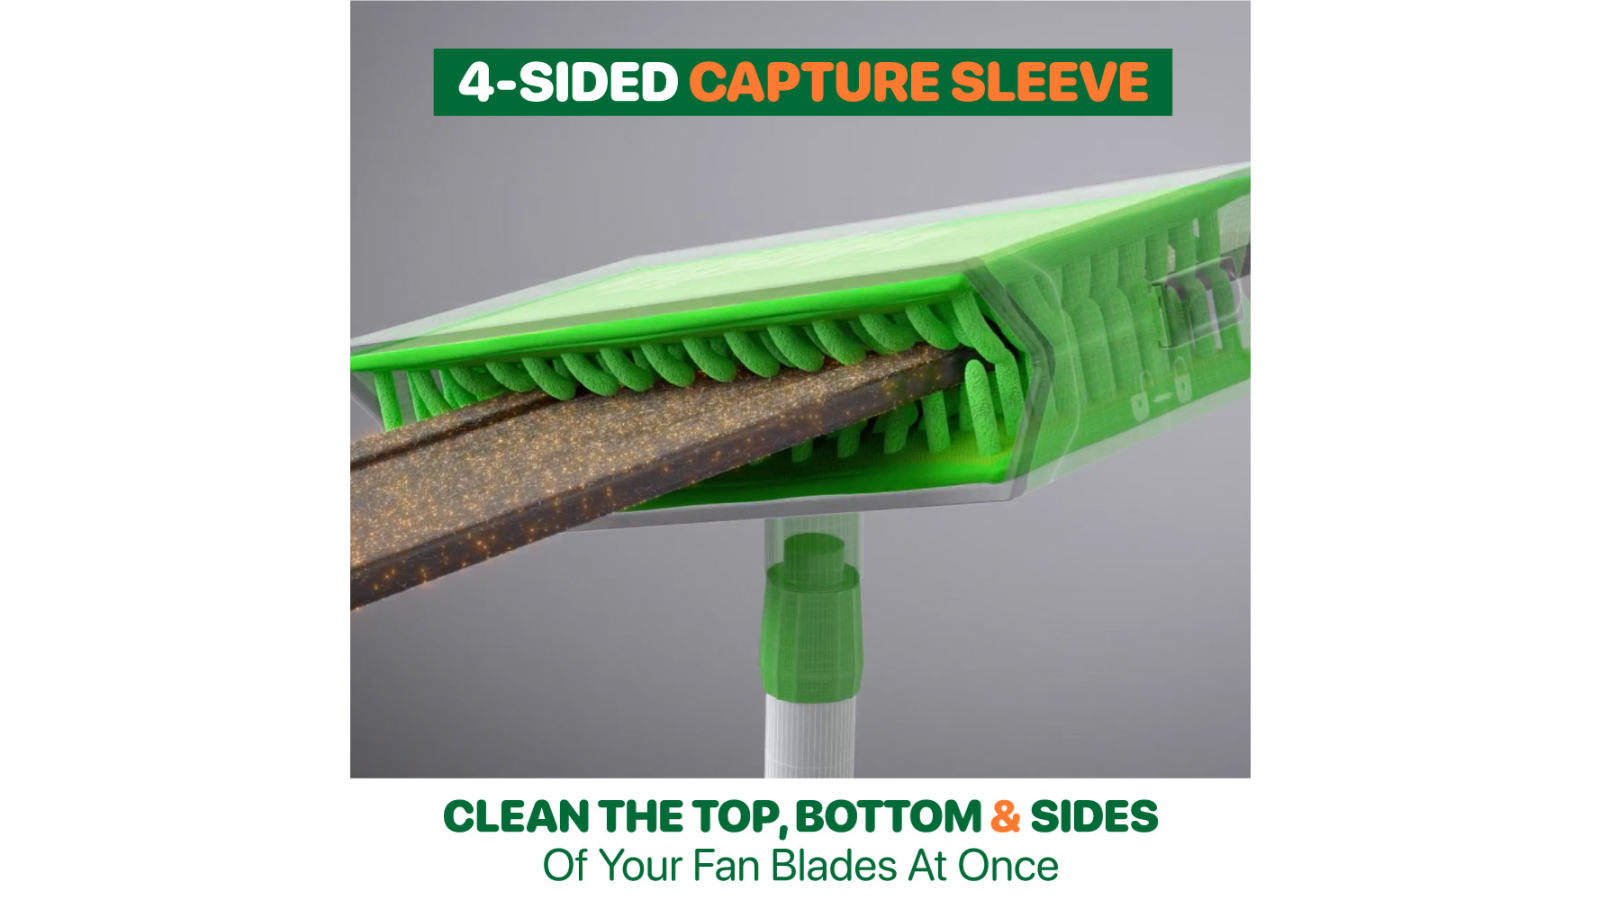 Buy Blade Maid Deluxe, With A Flexible Dusting Brush, The Best, No Mess  Way To Clean Ceiling Fans Online